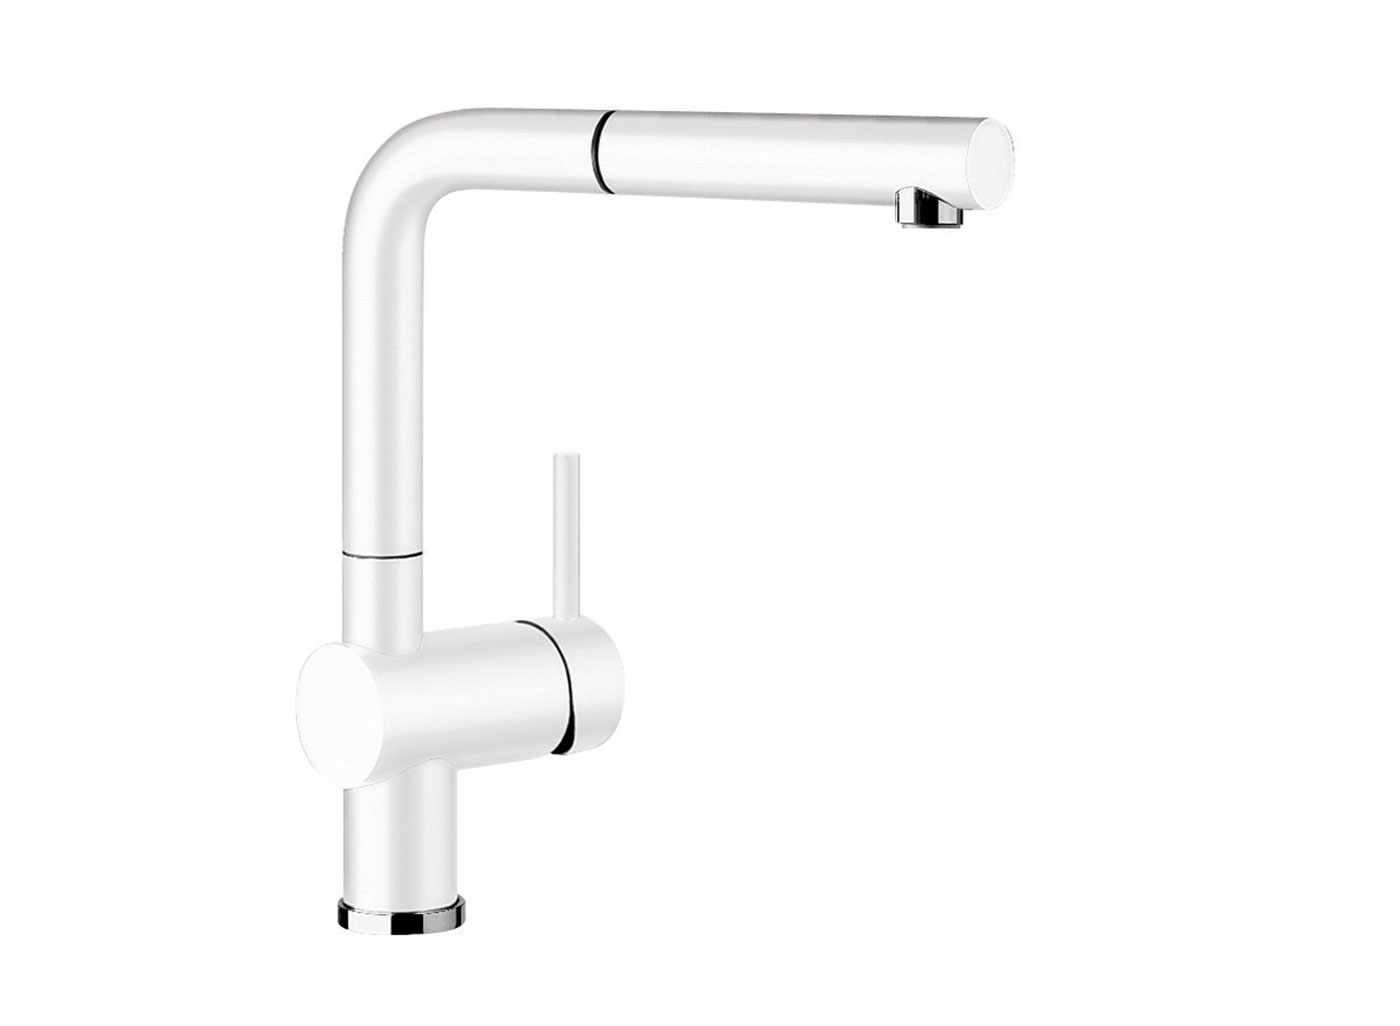 Blanco's Silgranit Linus-S Sink Mixer features a dual look finish (white or anthracite with chrome trimmings) to complement their extensive Silgranit sink range. The Linus-S mixer features a high spout which makes filling vases or pots an ease